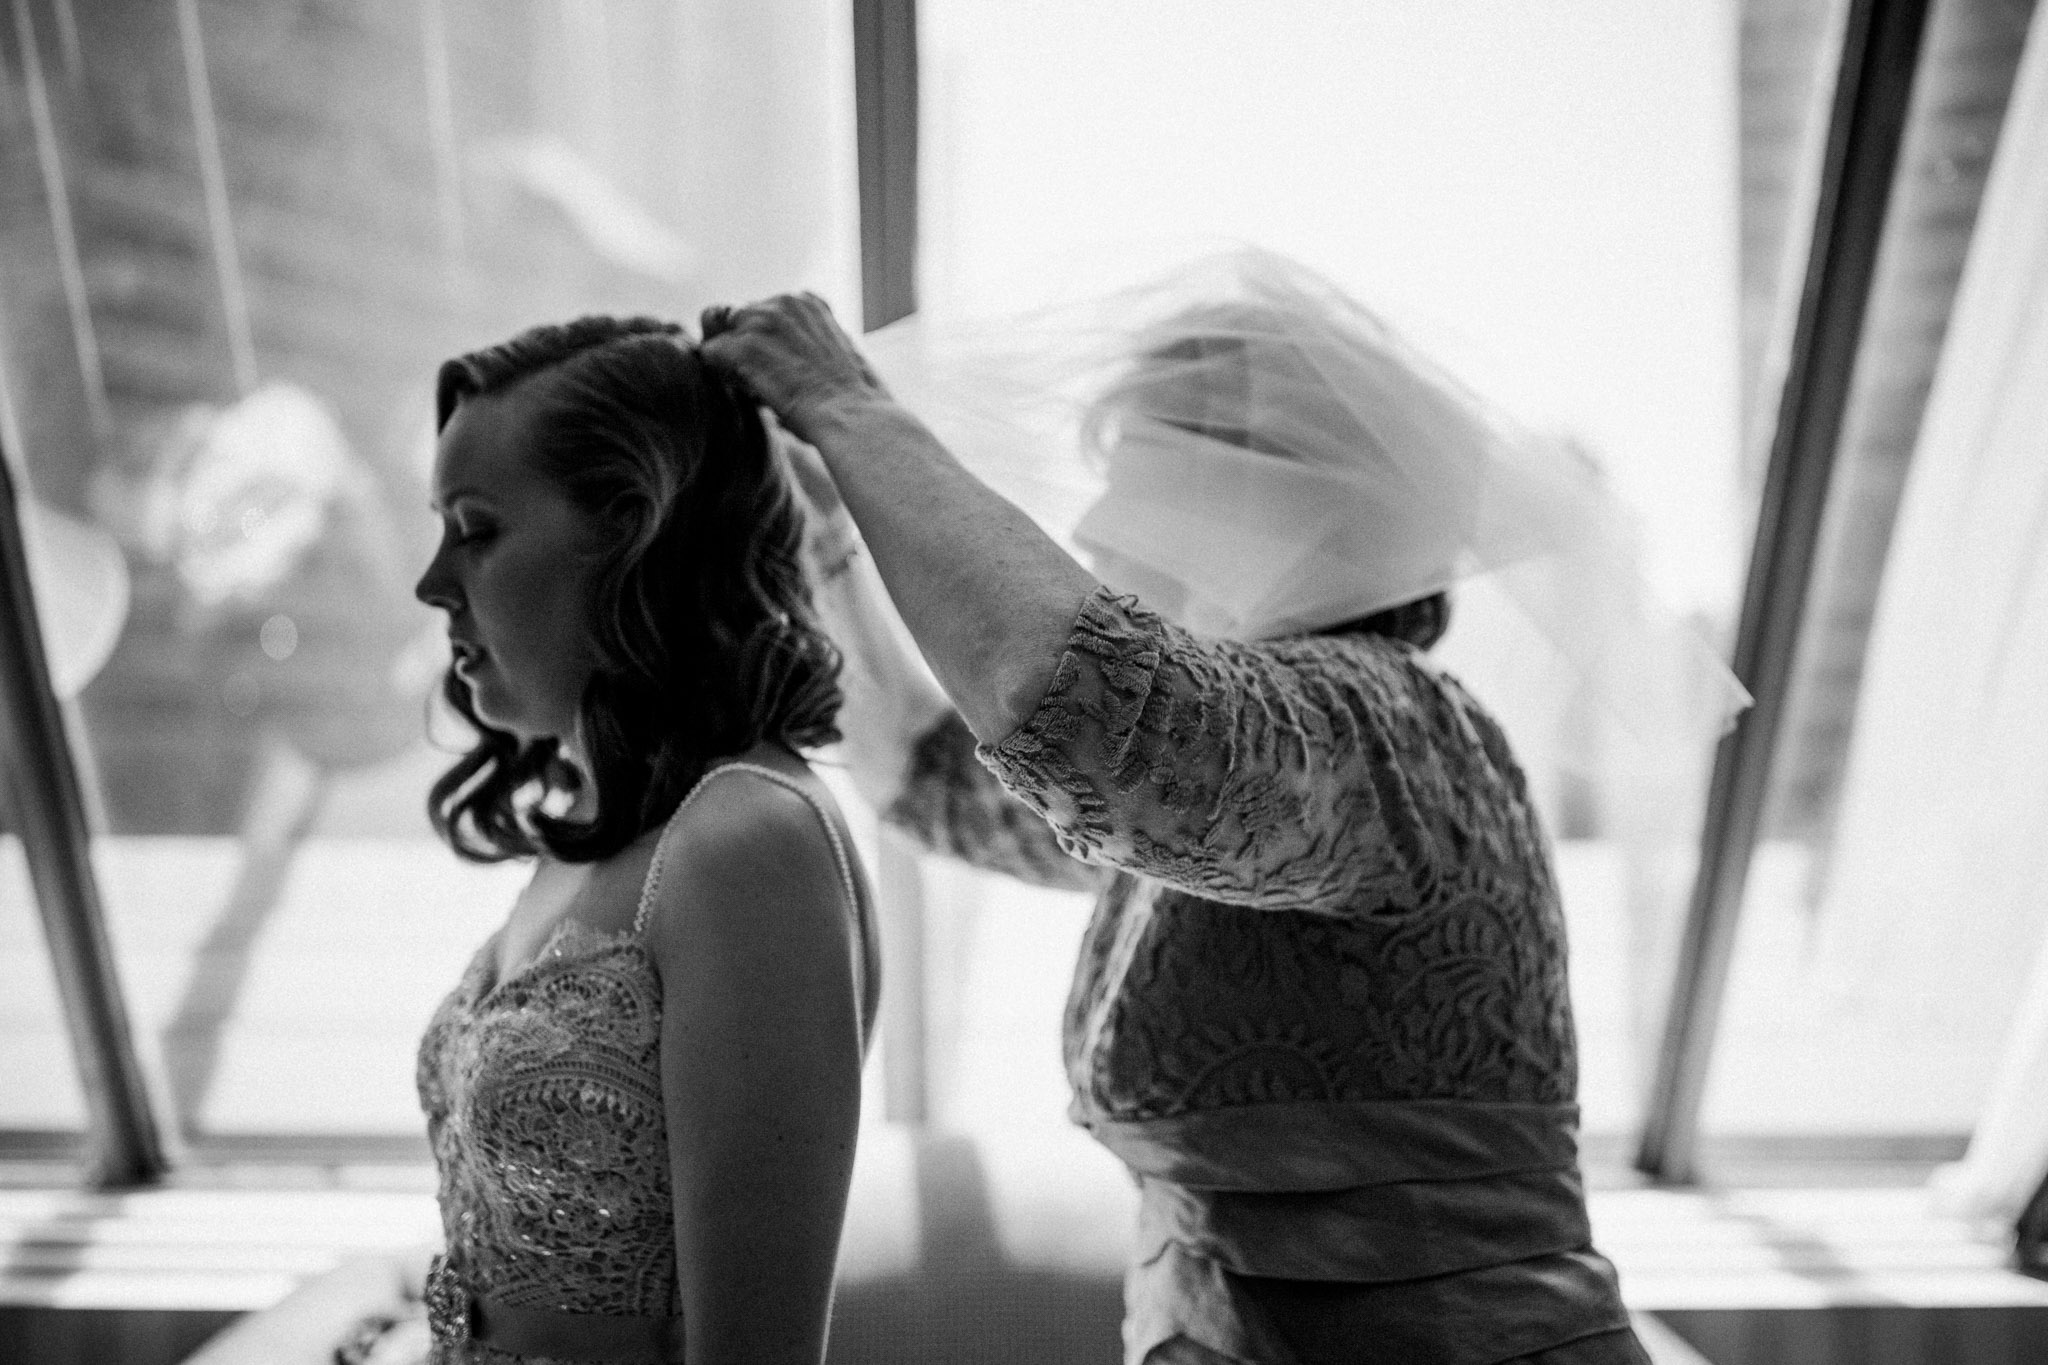 mother of bride helps with veil